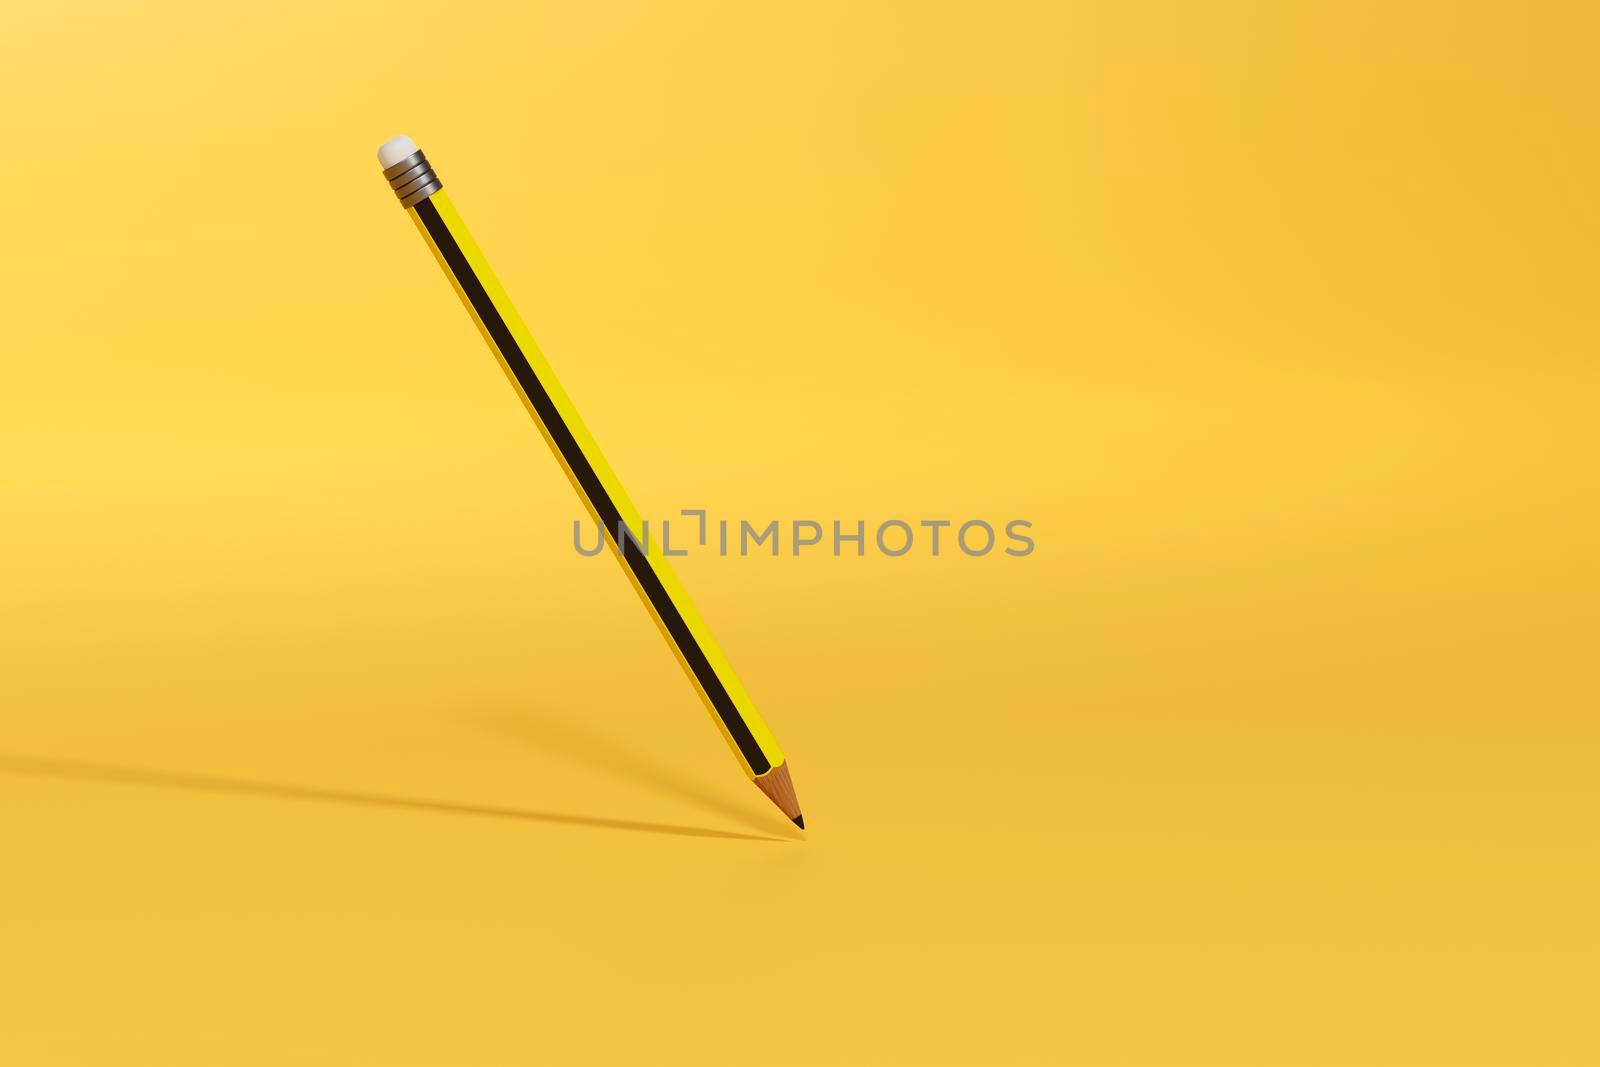 Yellow and black drawing pencil art design or education stationery equipment on creative color background with crayon paint writing object tool. 3D rendering.